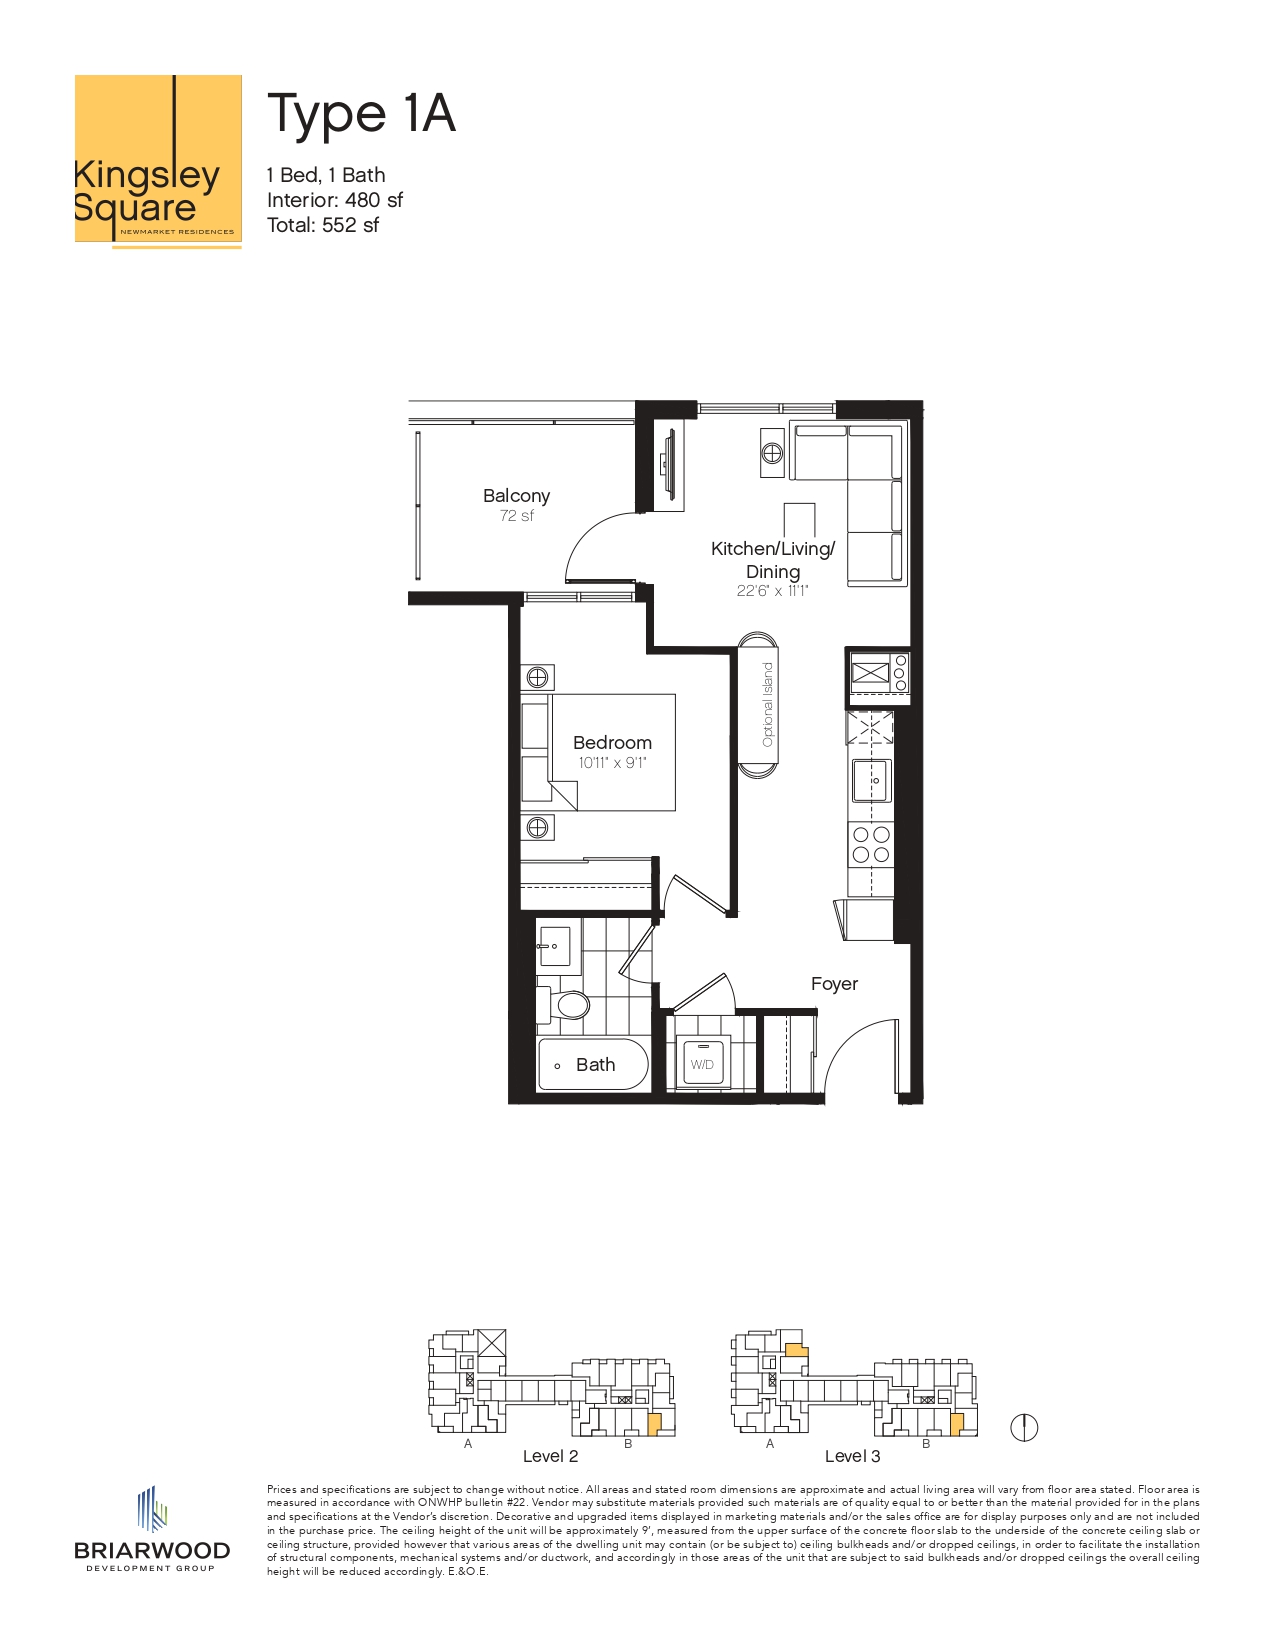 1A Floor Plan of Kingsley Square Condos with undefined beds